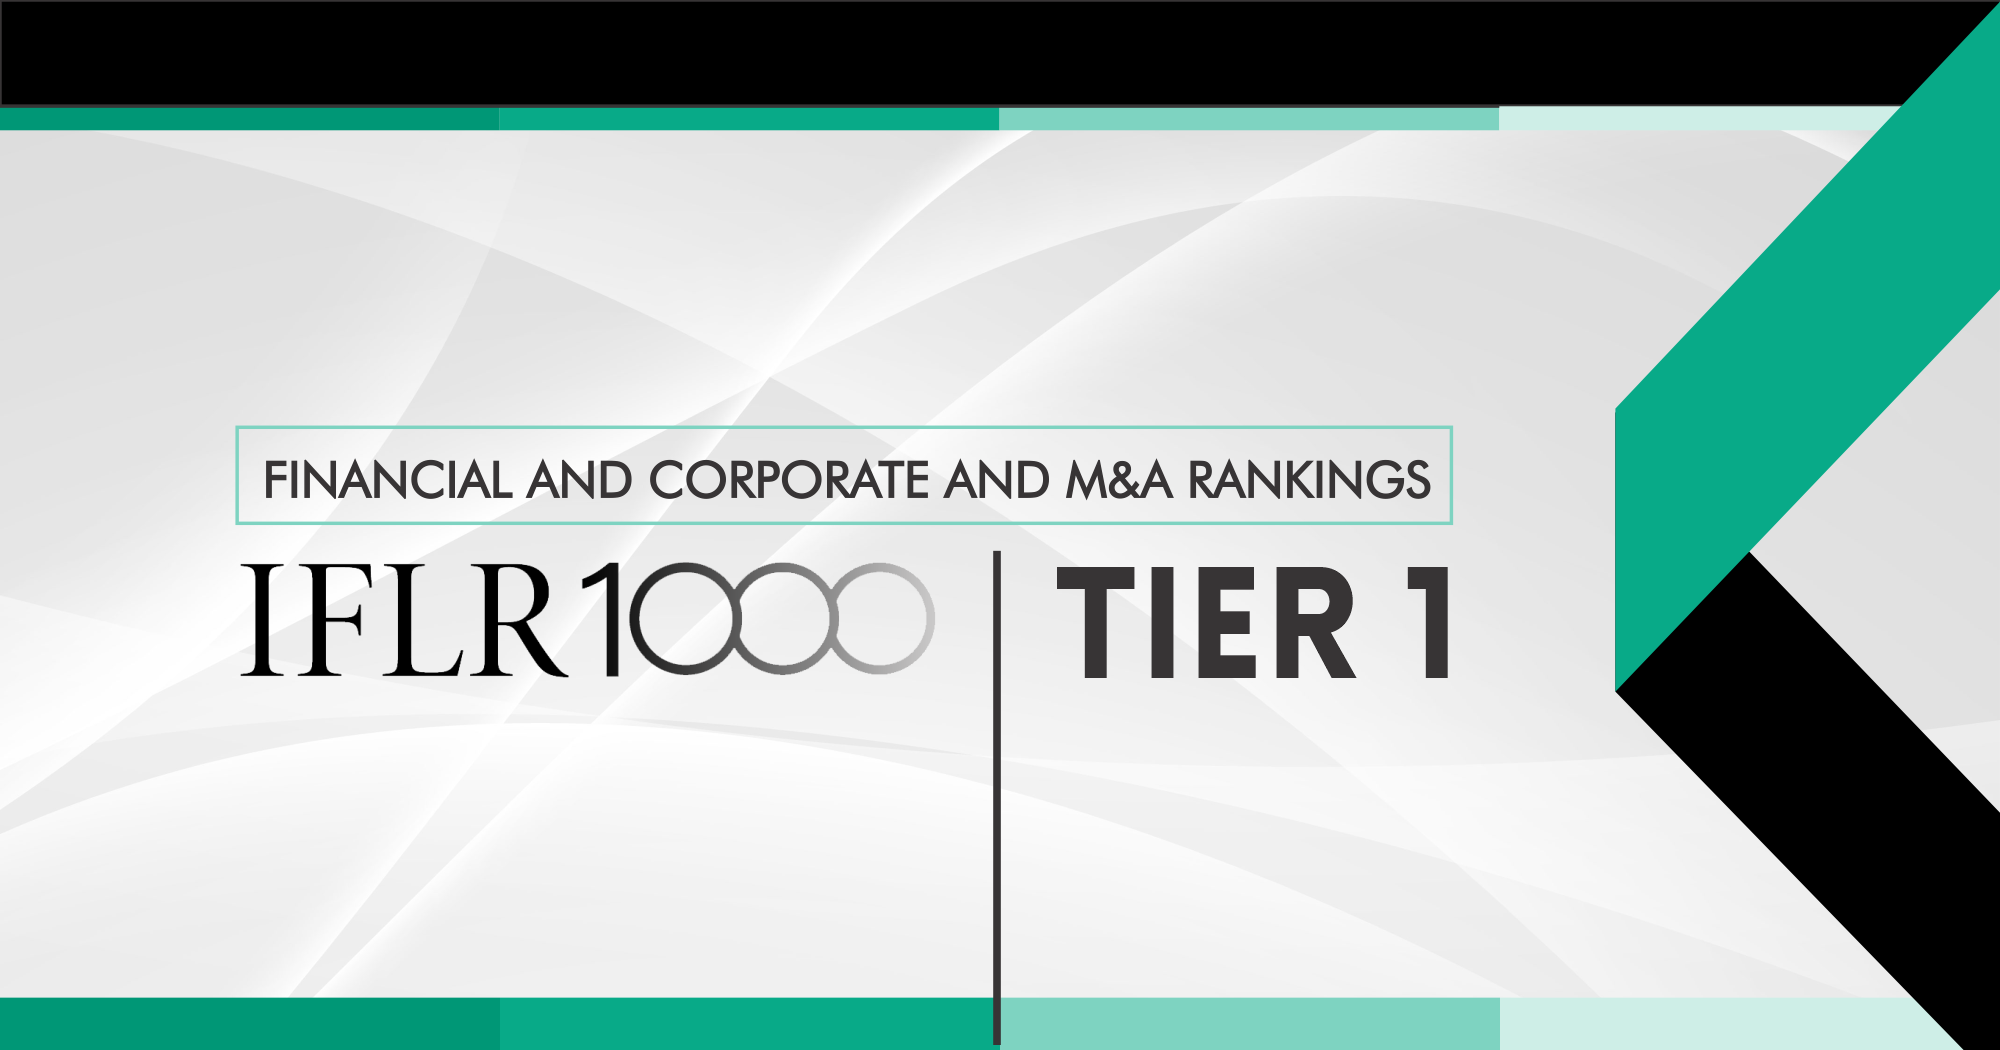 "Quality service in a responsive and efficient manner “ - 2021 IFLR100 rankings cement Elias Neocleous & Co LLC position as ‘Tier 1’ legal firm.